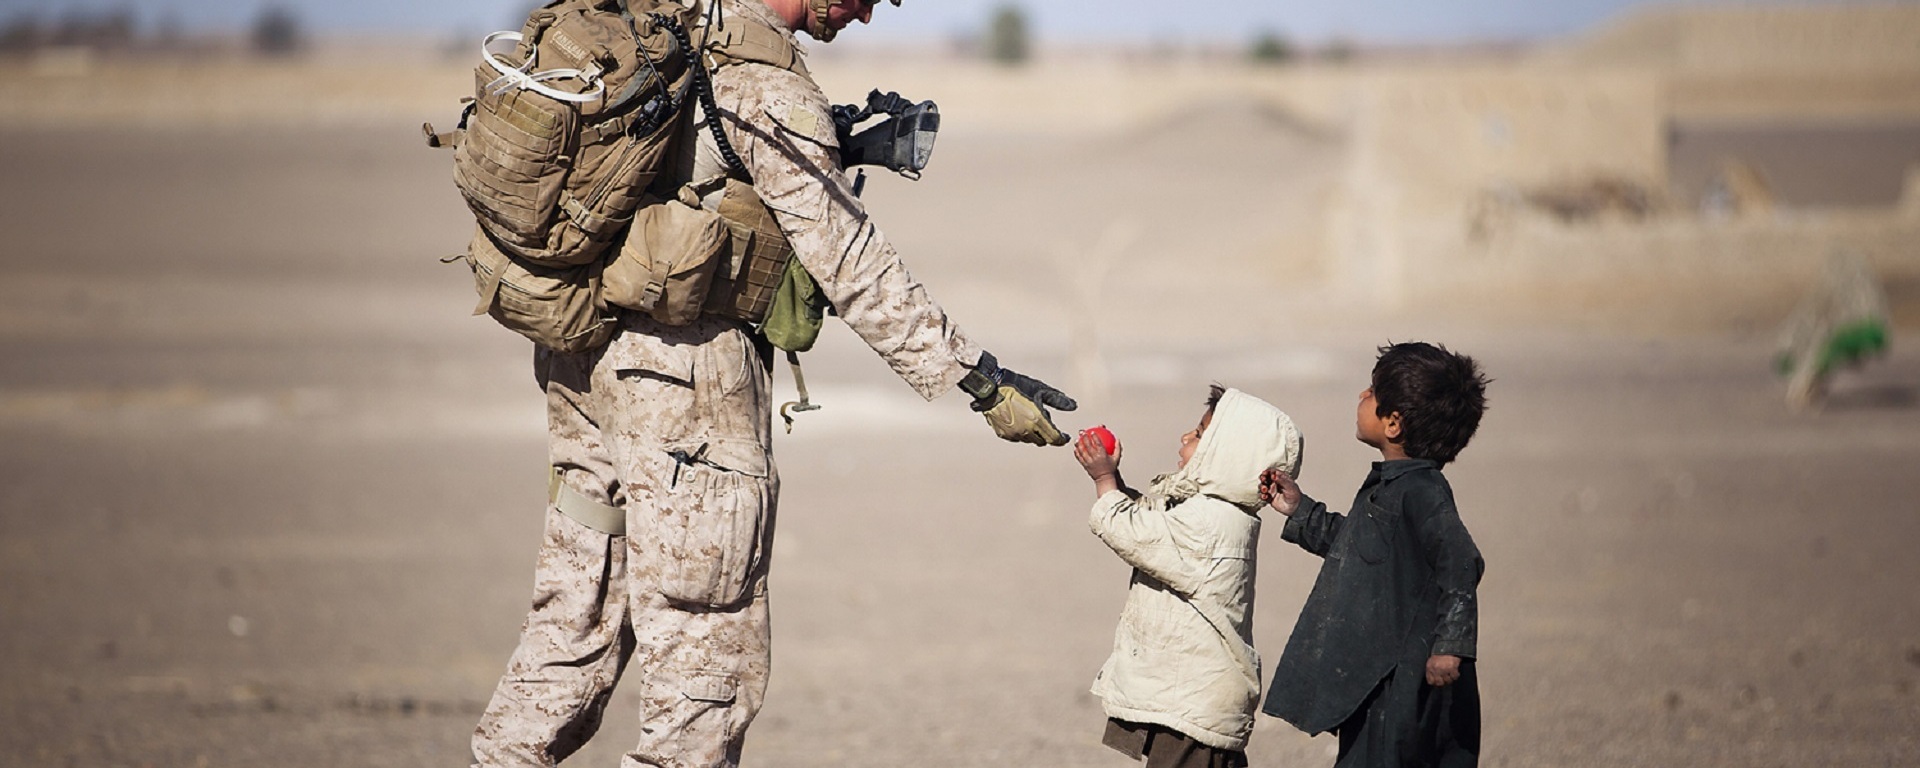 soldier,military,uniform,american,gifts,children,young,kids,people,humanity,poignant, DON CHARISMA